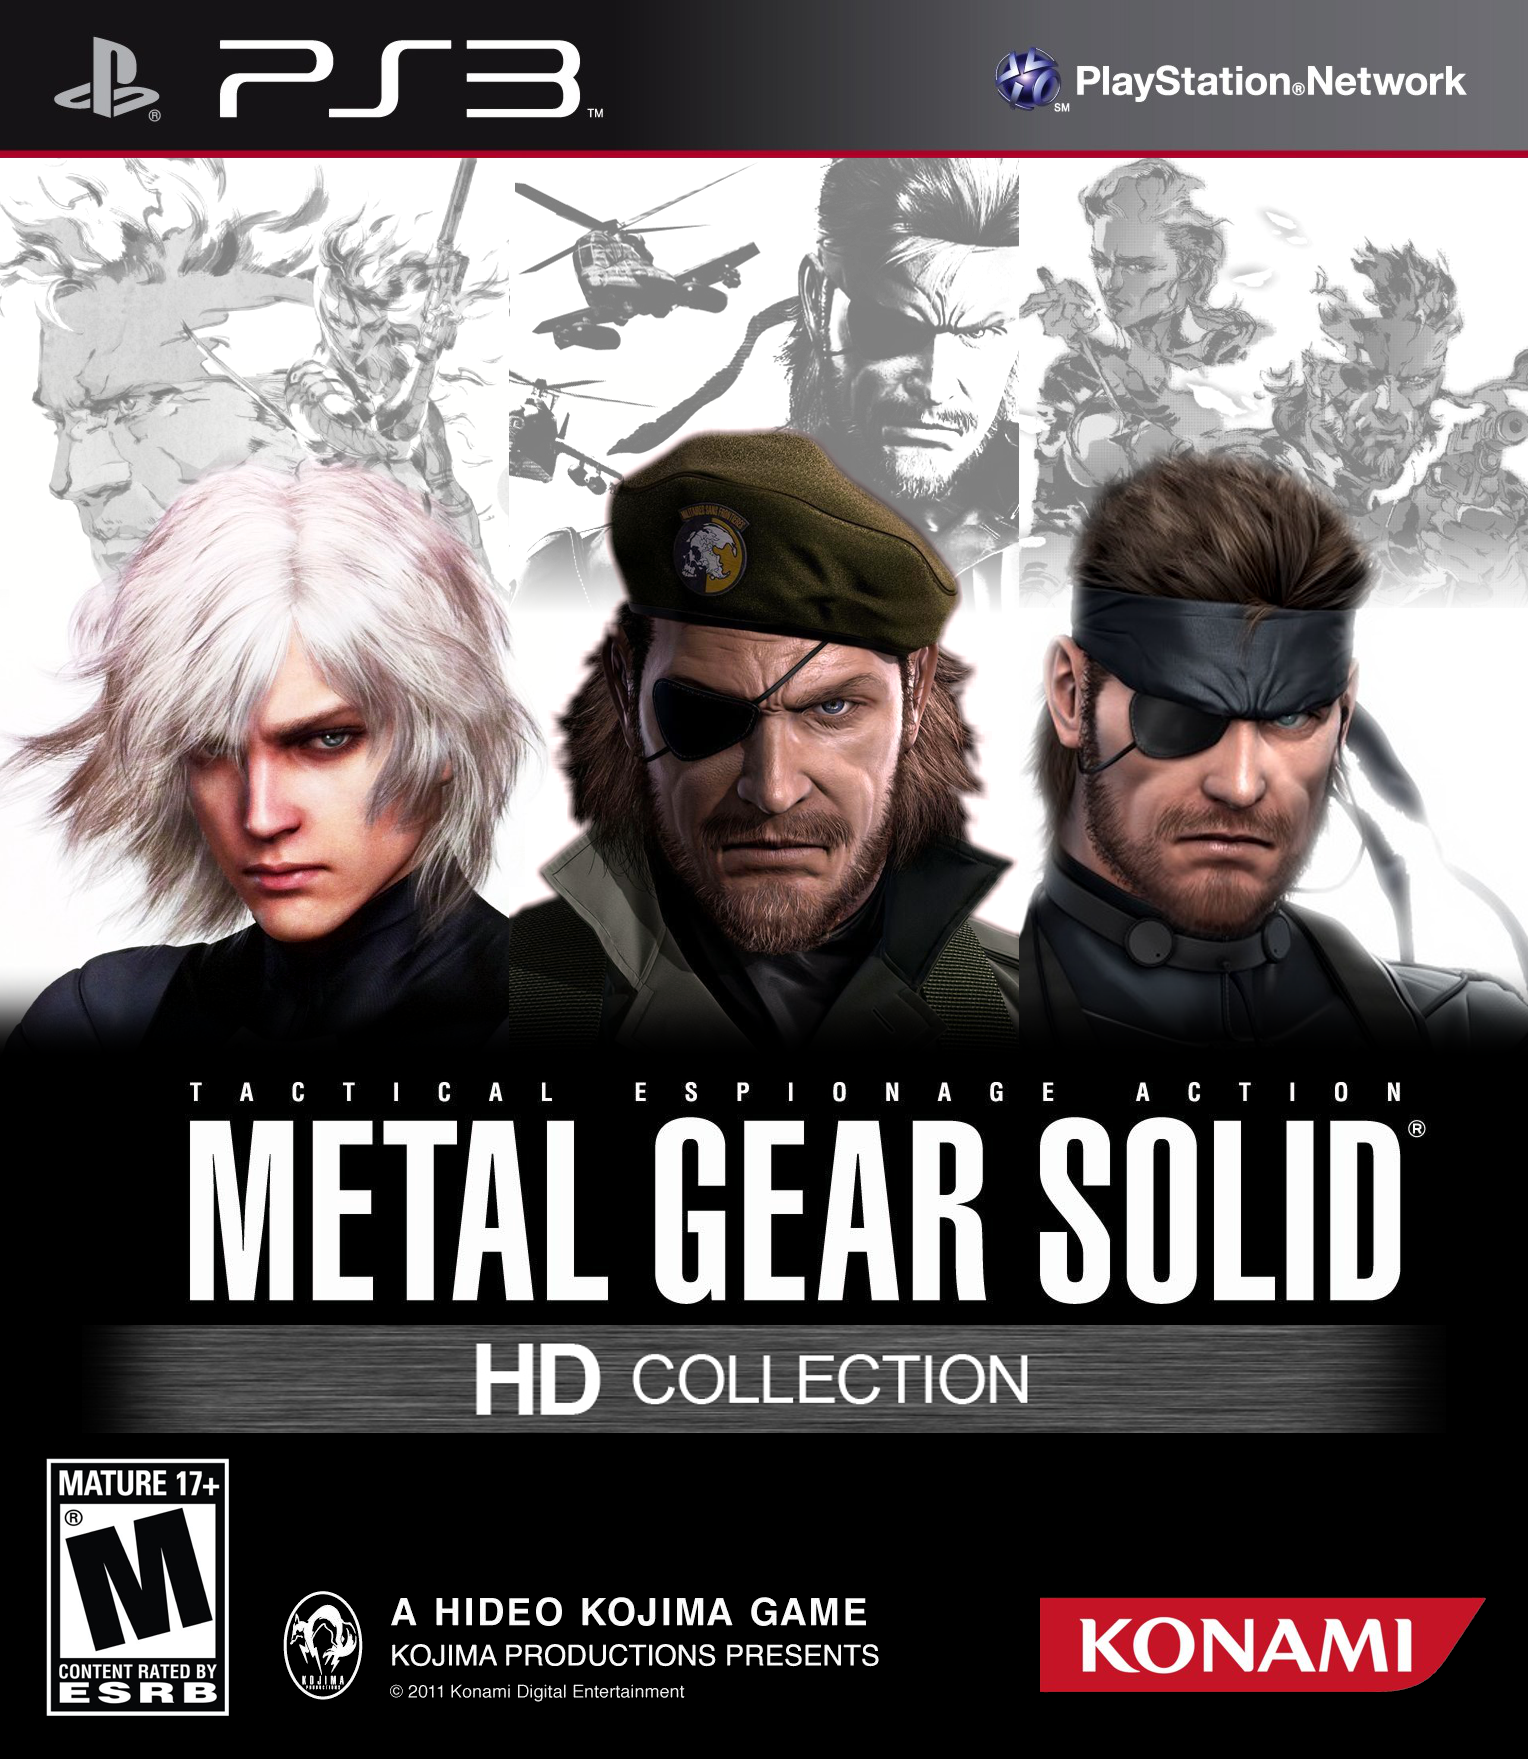 Mgs 3 master collection. Metal Gear Solid ps1. Metal Gear Solid ps1 Box Cover. Metal Gear Solid 1998.